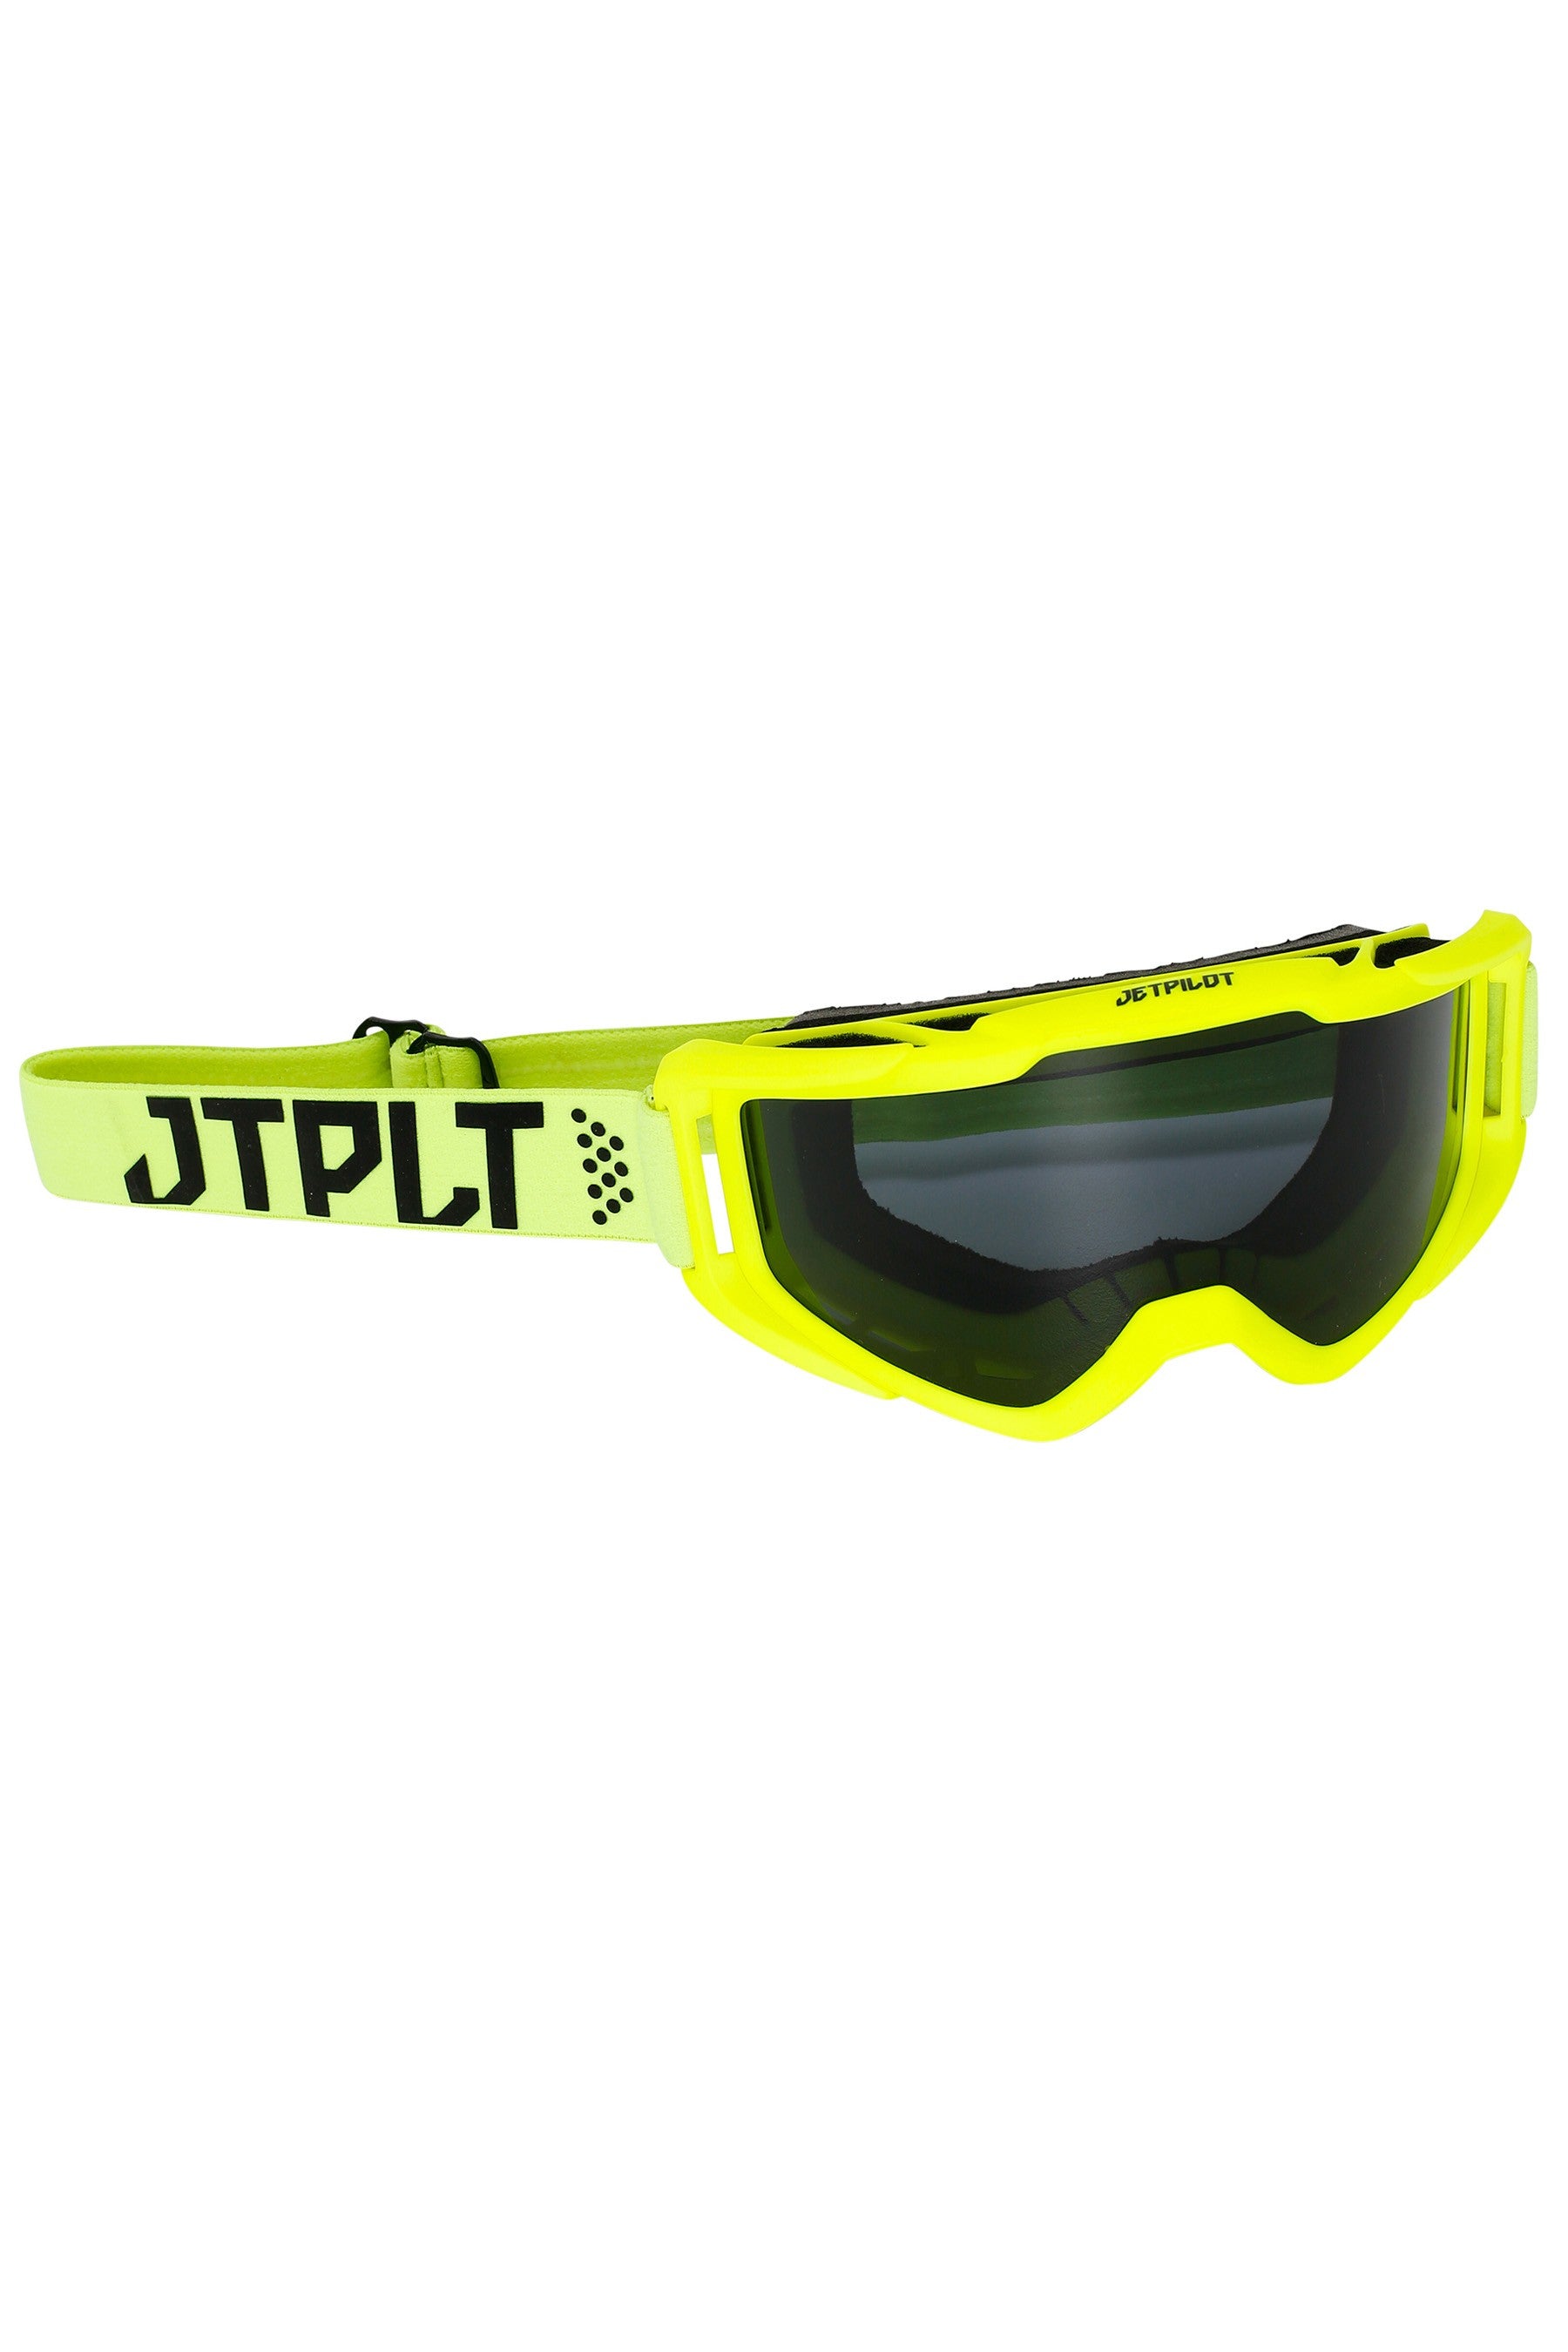 Jetpilot Rx Solid Goggle - Yellow